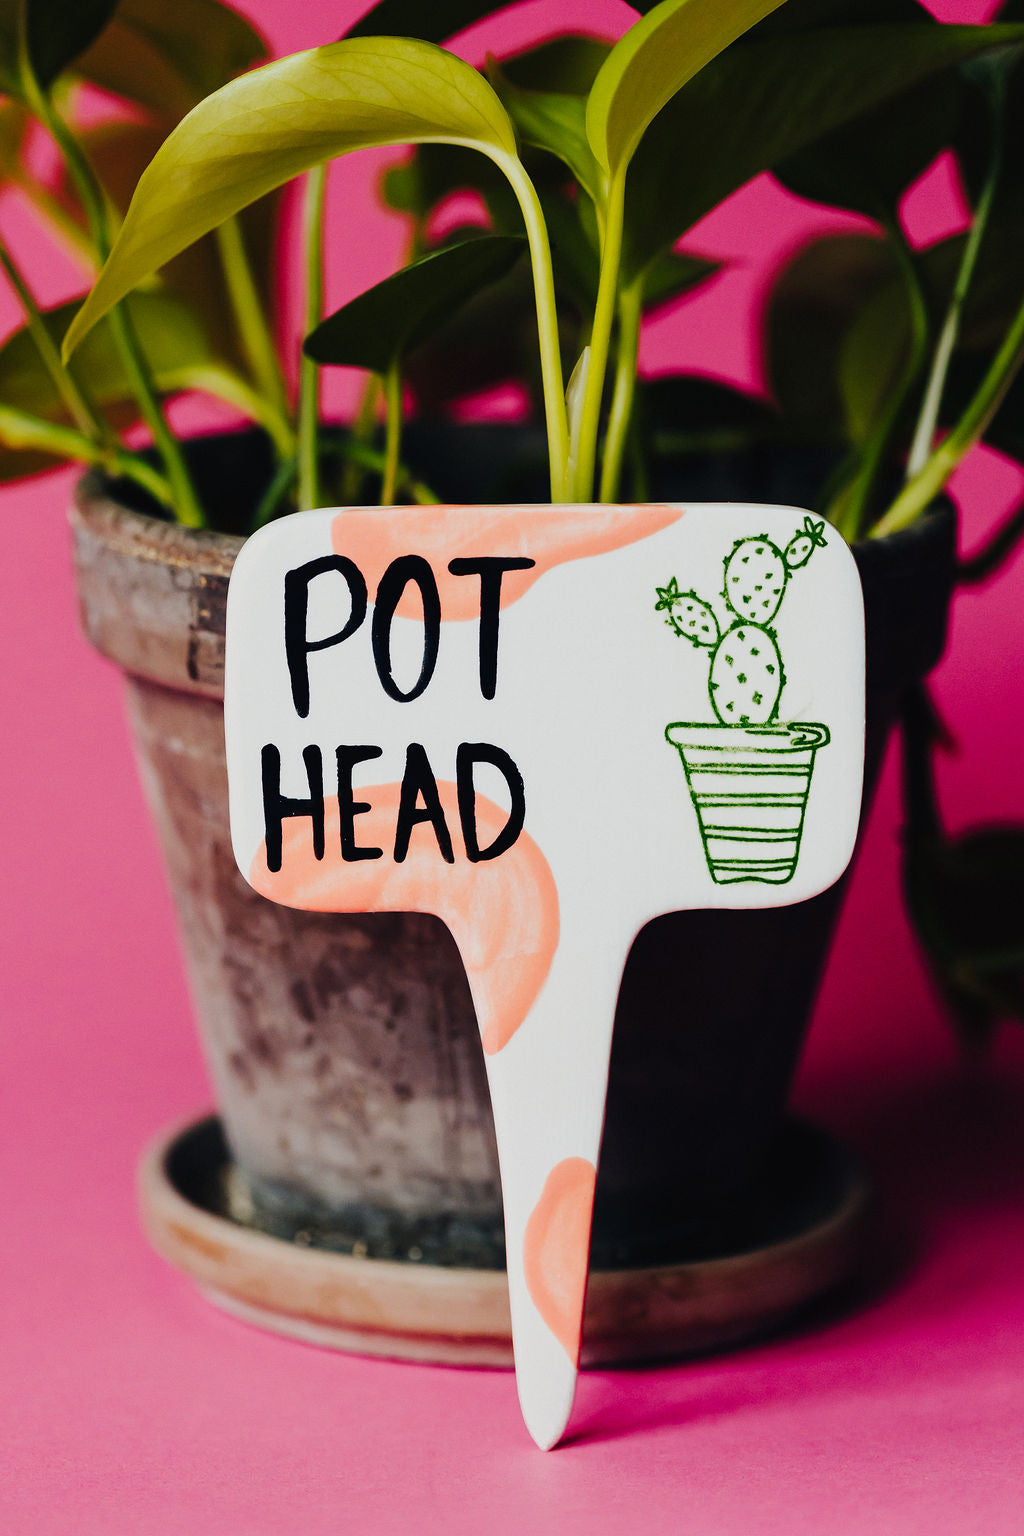 Pot Head Funny Punny Garden Plant Stake